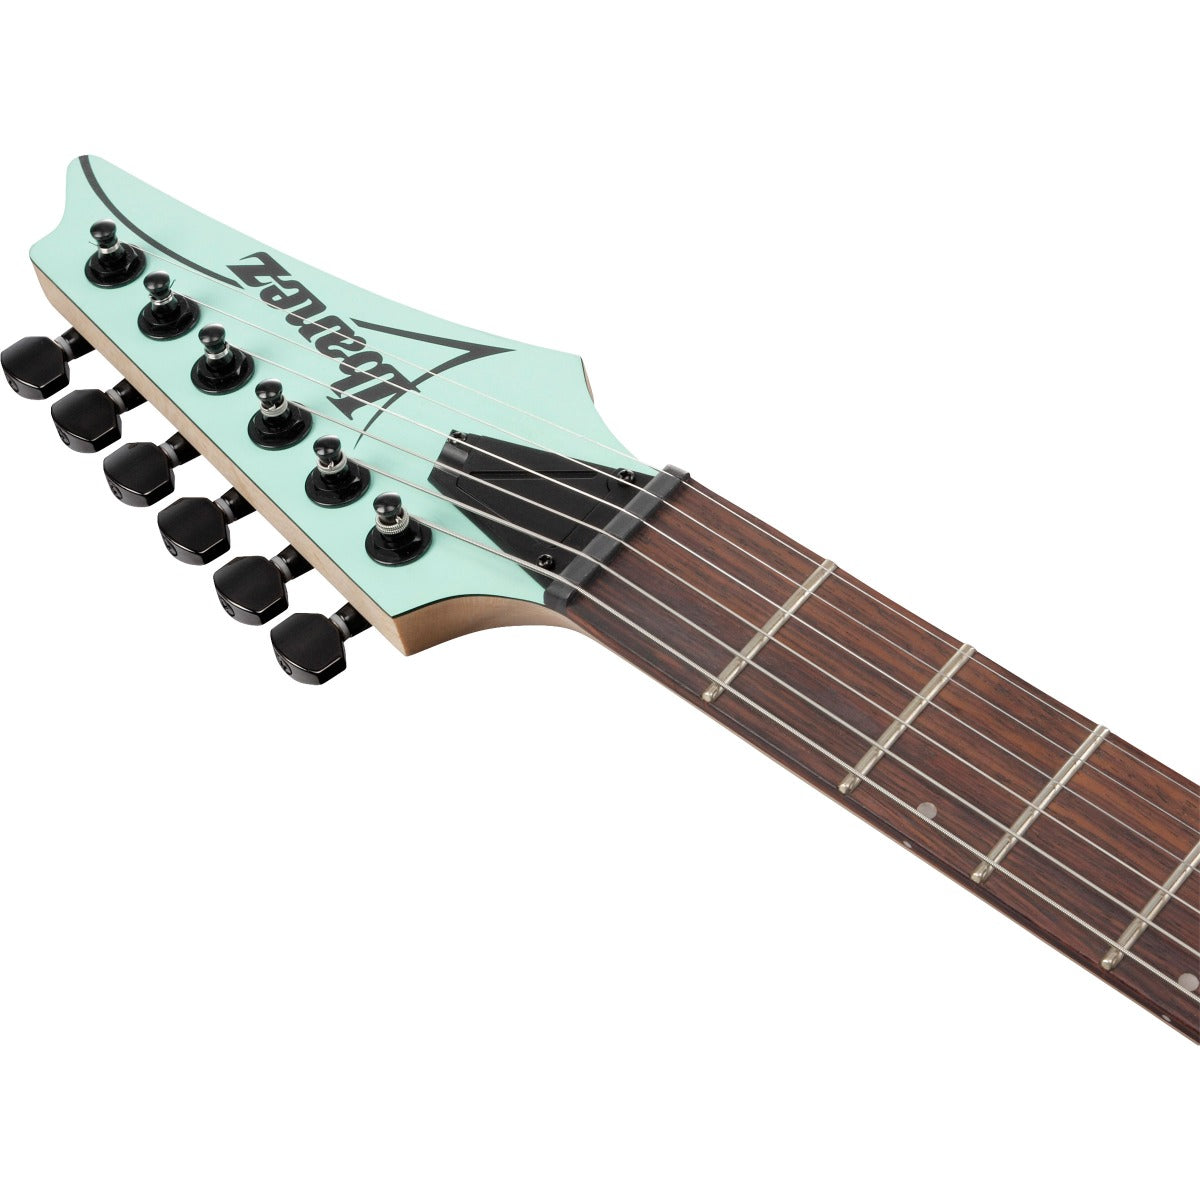 Detail image of Ibanez S561 S Standard Electric Guitar - Sea Foam Green showing top of headstock and portion of fingerboard